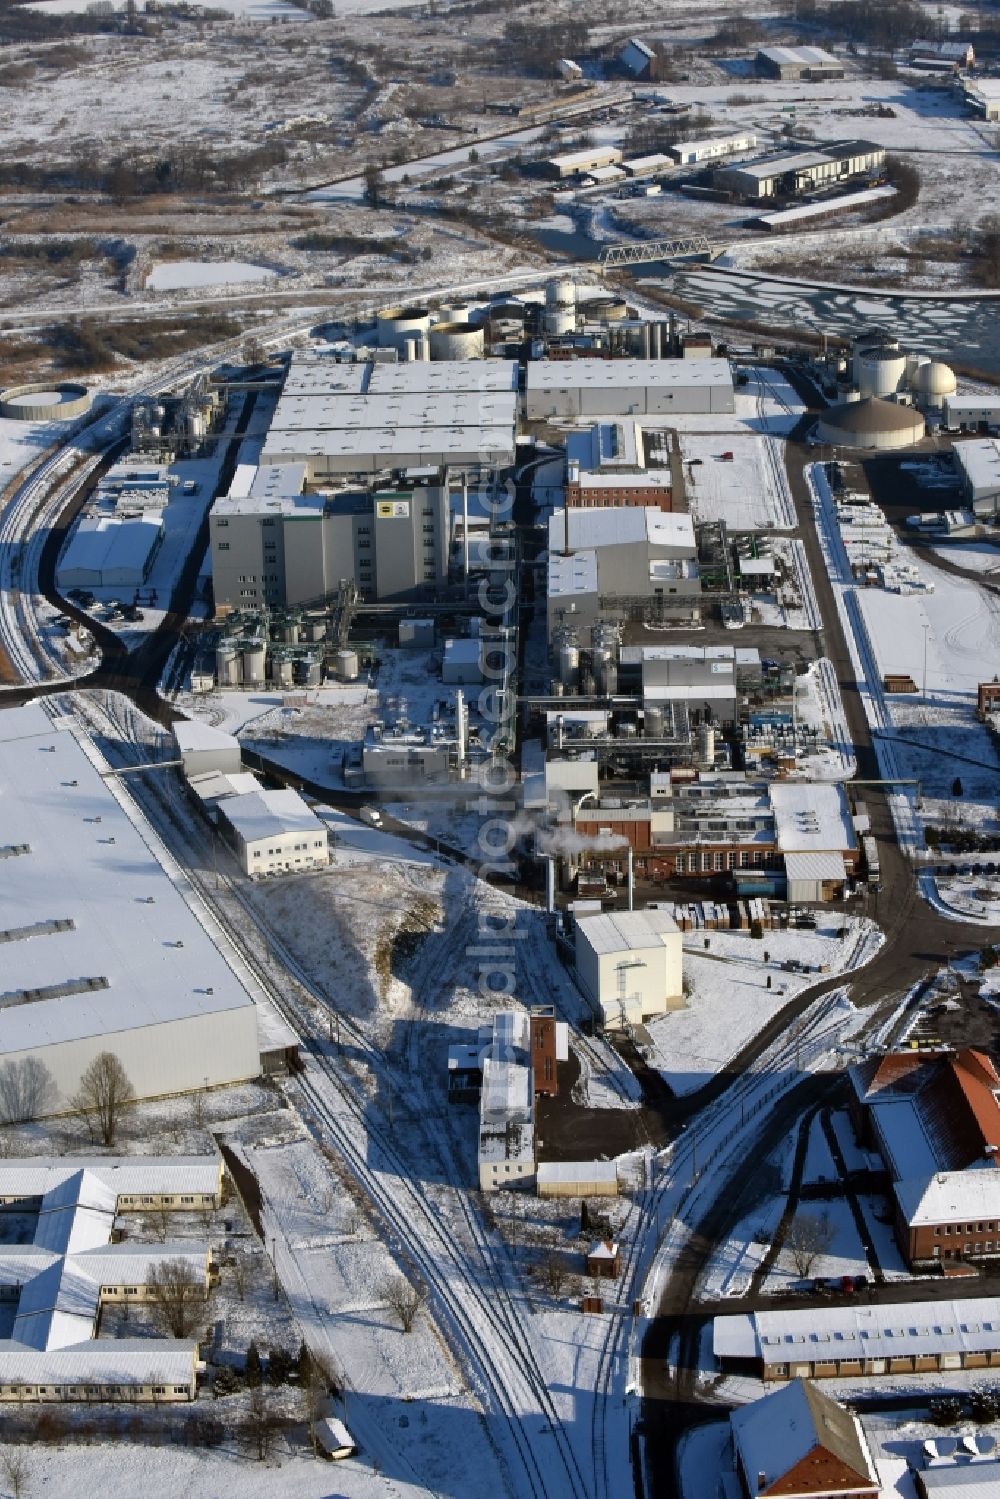 Genthin from the bird's eye view: Wintry snow-covered company grounds and facilities of Waschmittelwerk Genthin GmbH (laundry detergent works) in Genthin in the state of Saxony-Anhalt. The works and facilities area located in the Northern industrial park on the riverbank of the Elbe-Havel-Canal and are part of Hansa Group